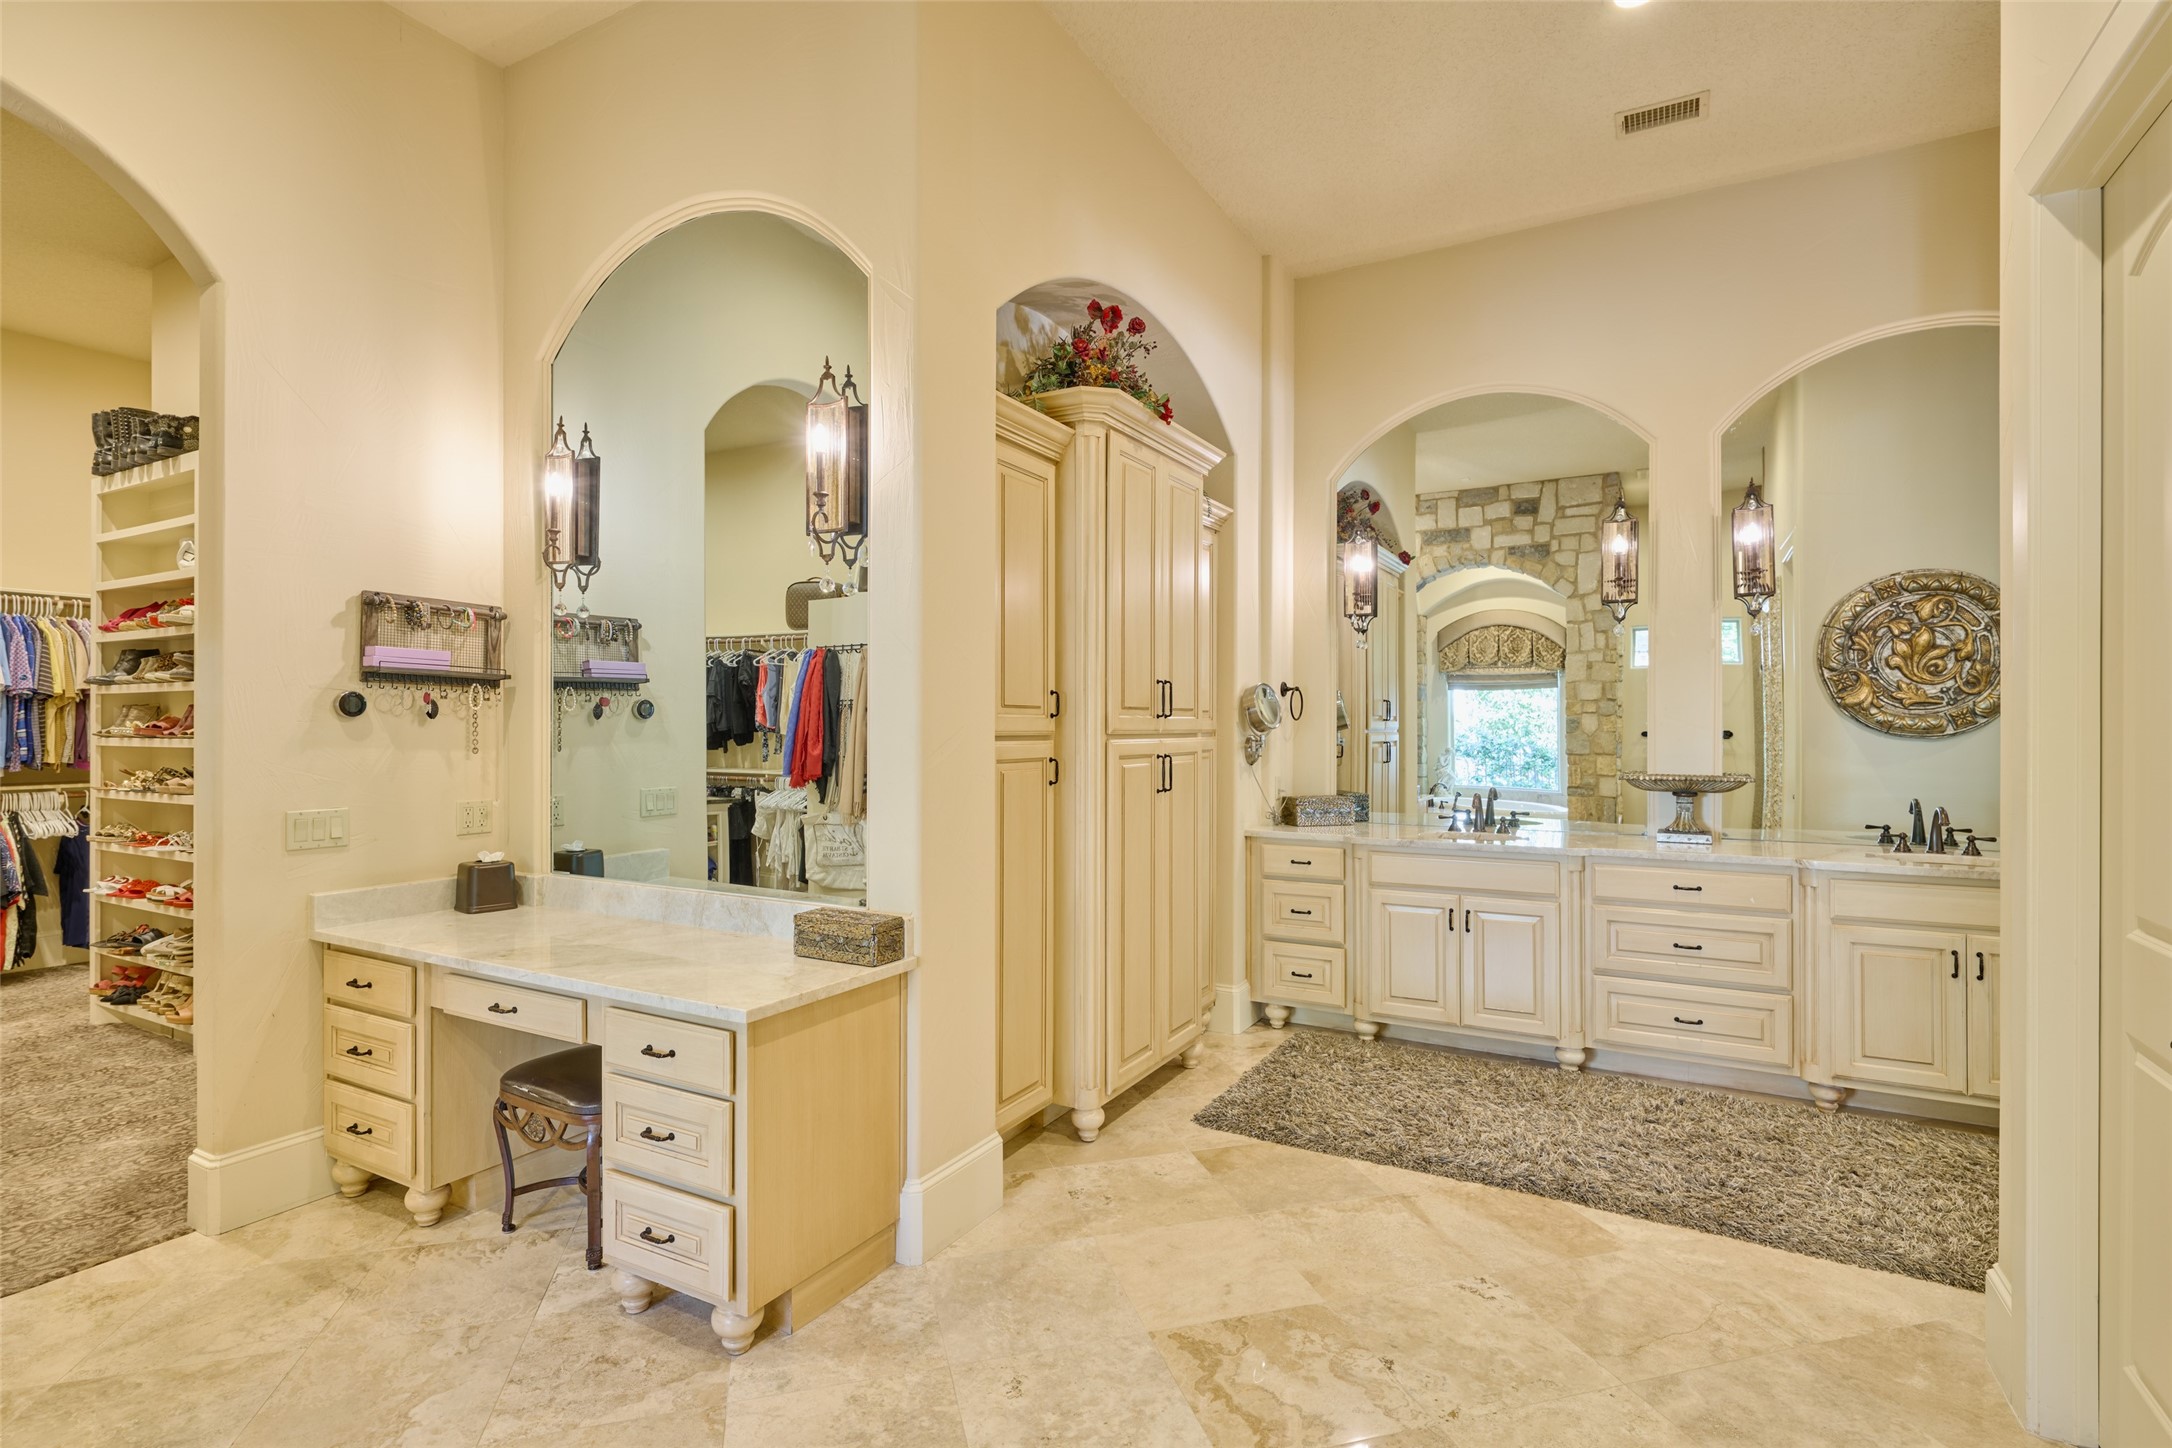 Luxurious master bath with dual sinks, separate vanity area, TV behind mirror (is a must-see!), remote control gas fireplace, remote window shades, polished travertine marble, Toto Neorest Bidet (included) the 'Bentley' of bidet systems